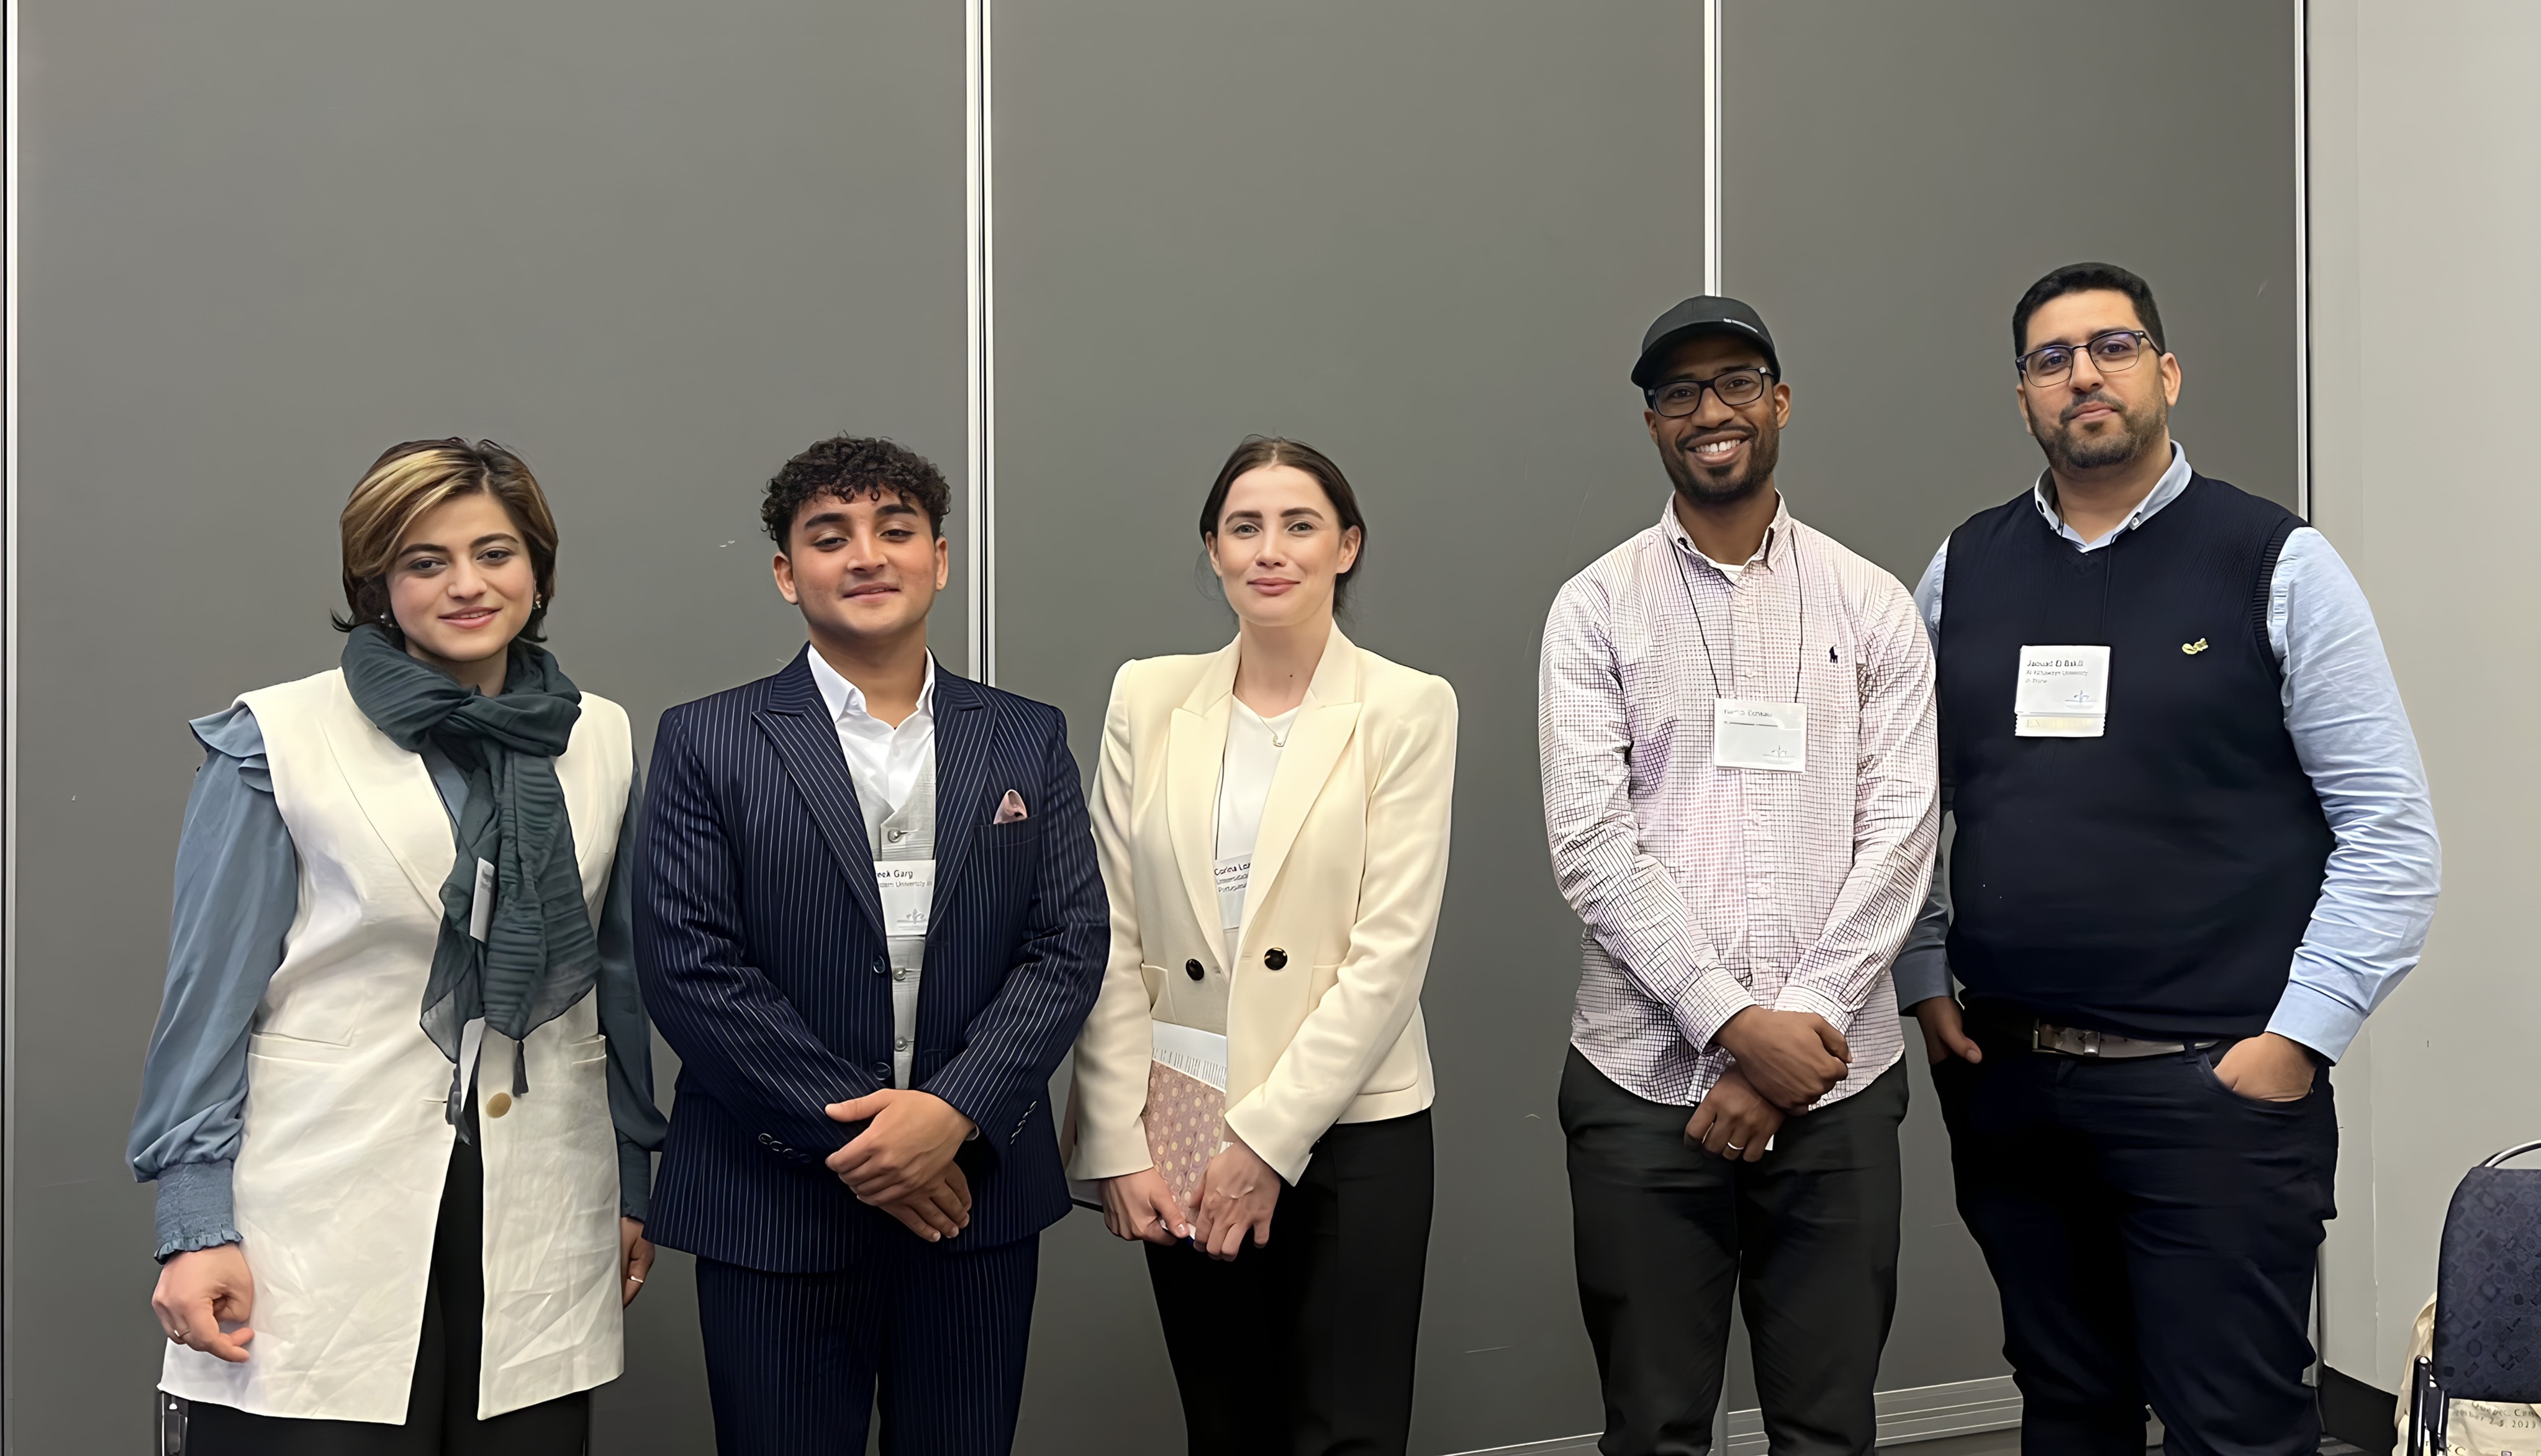 Sashreek Garg ’25 (second from left) presented his research project on gender stereotyping and harassment on social media in India